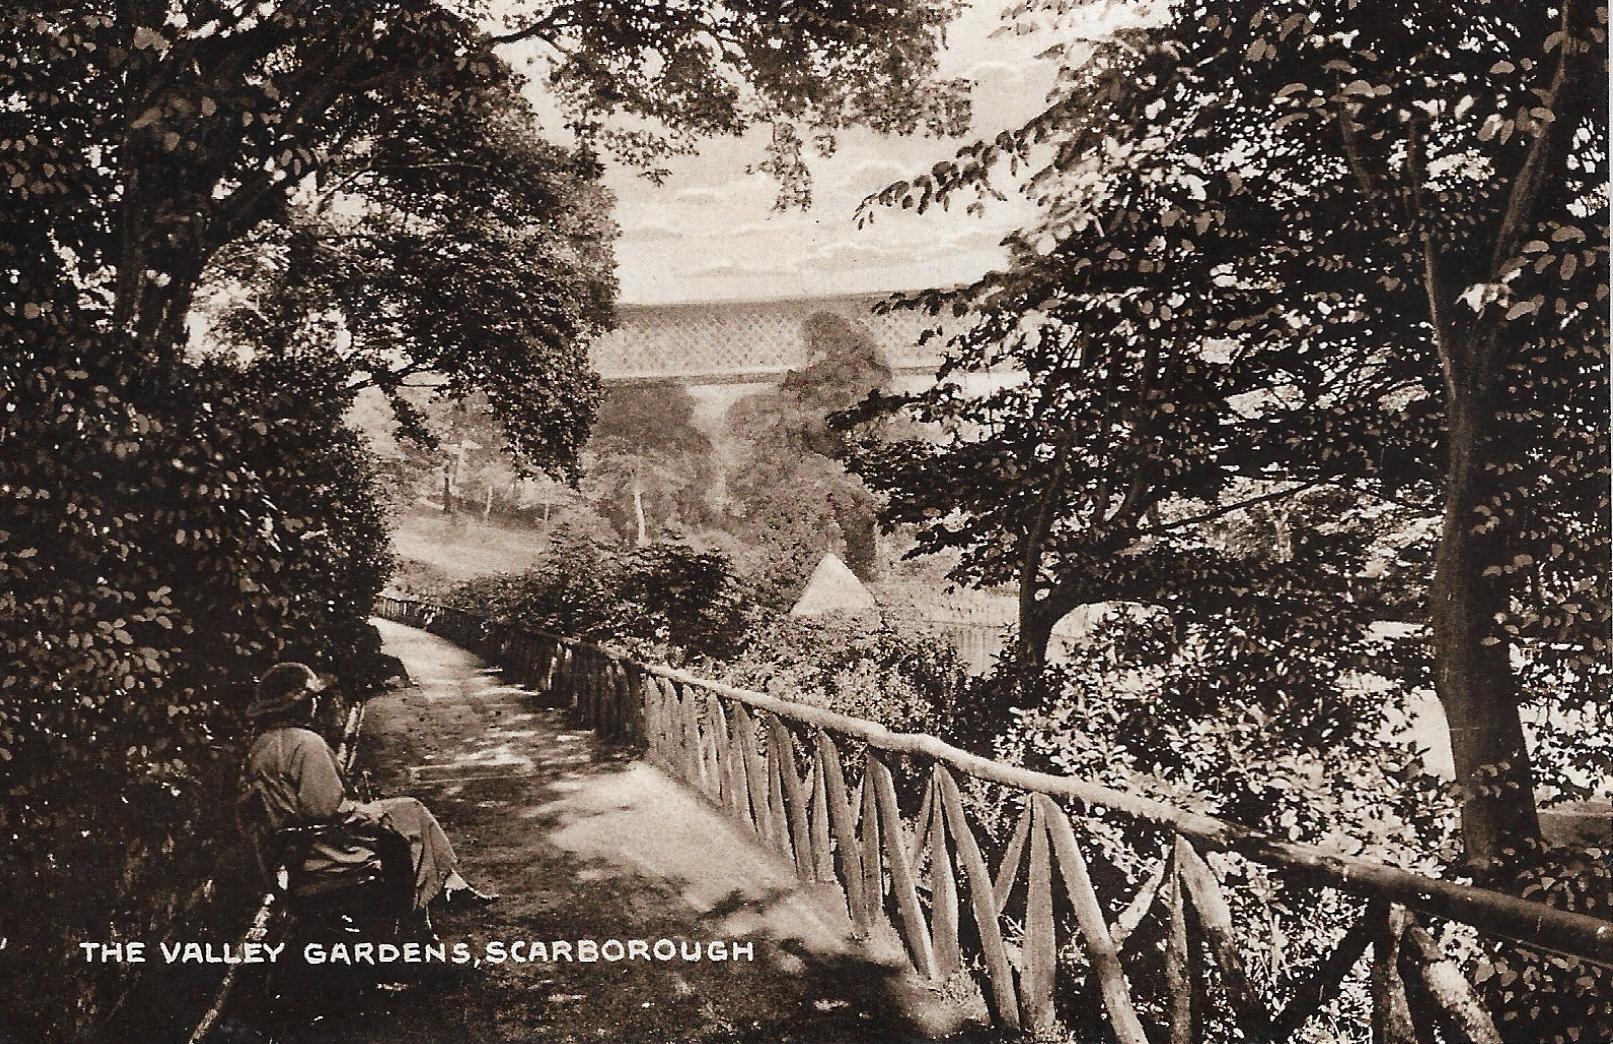 The Friends of Scarborough Valley Gardens Edwardian Heyday 1